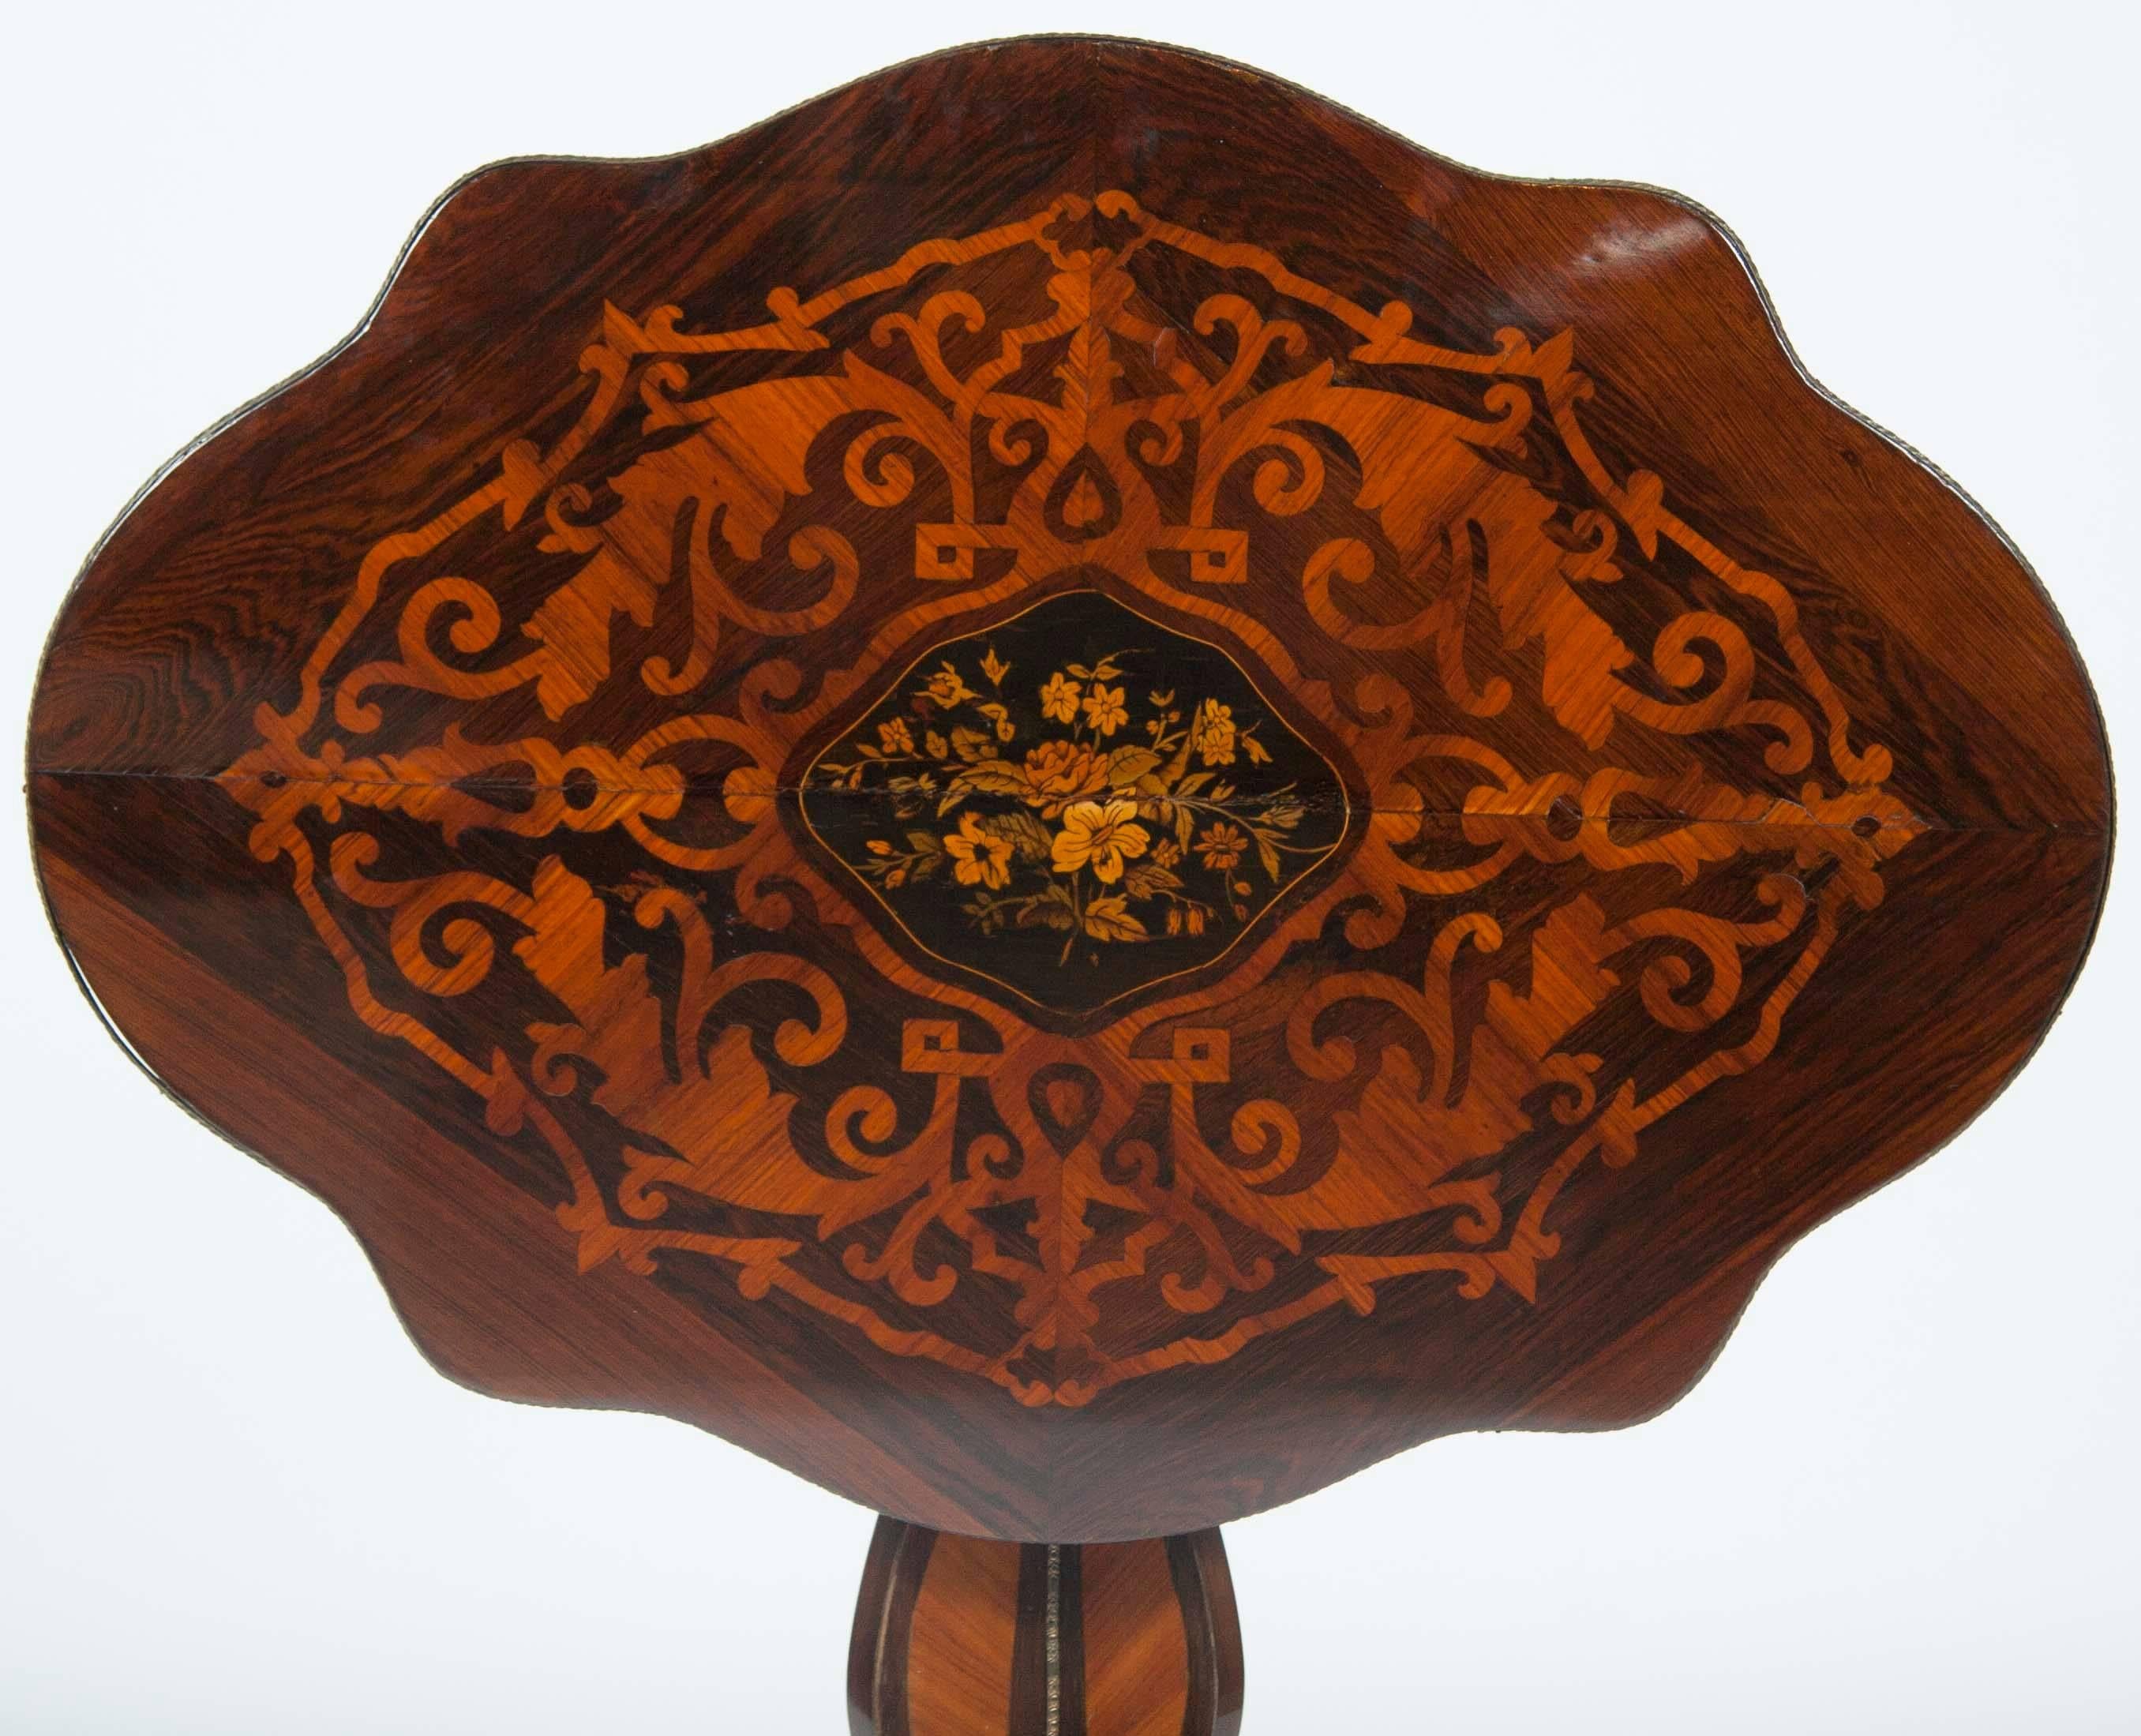 A late 19th century French Napoleon III period flower inlaid and bronze-mounted tilt top table.